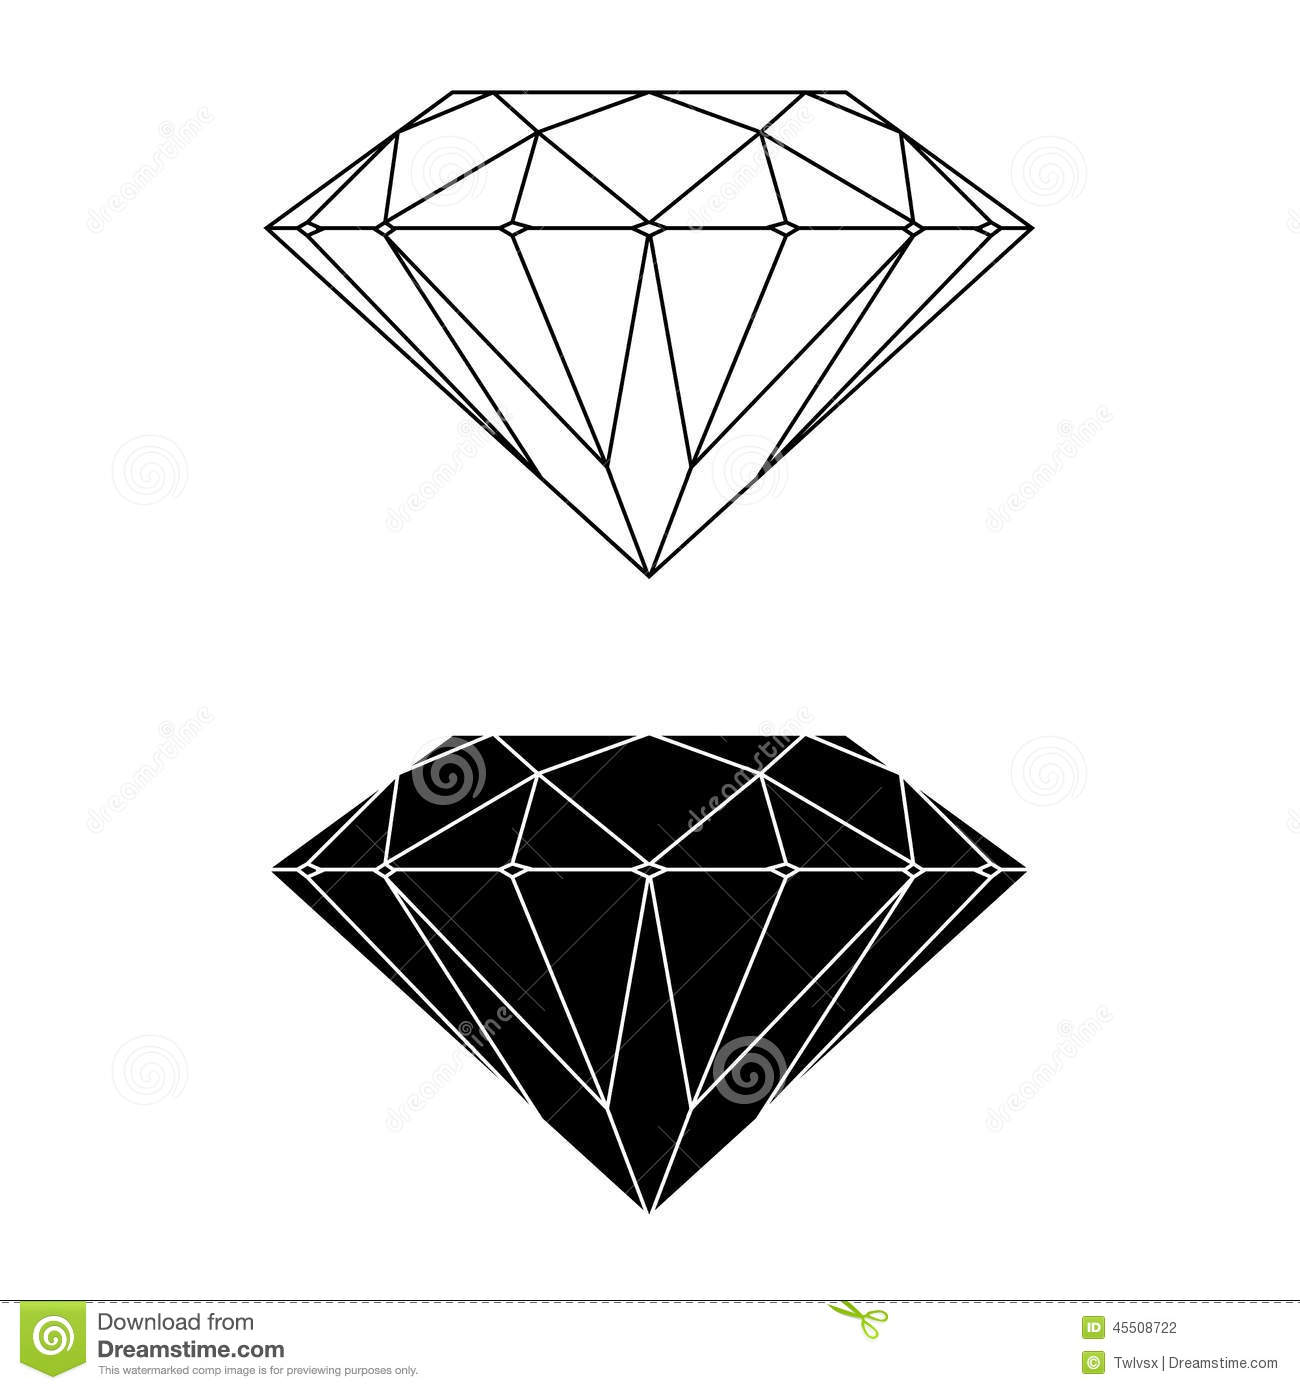 Stock Photography  Diamond Vector And Silhouette  Image  45508722